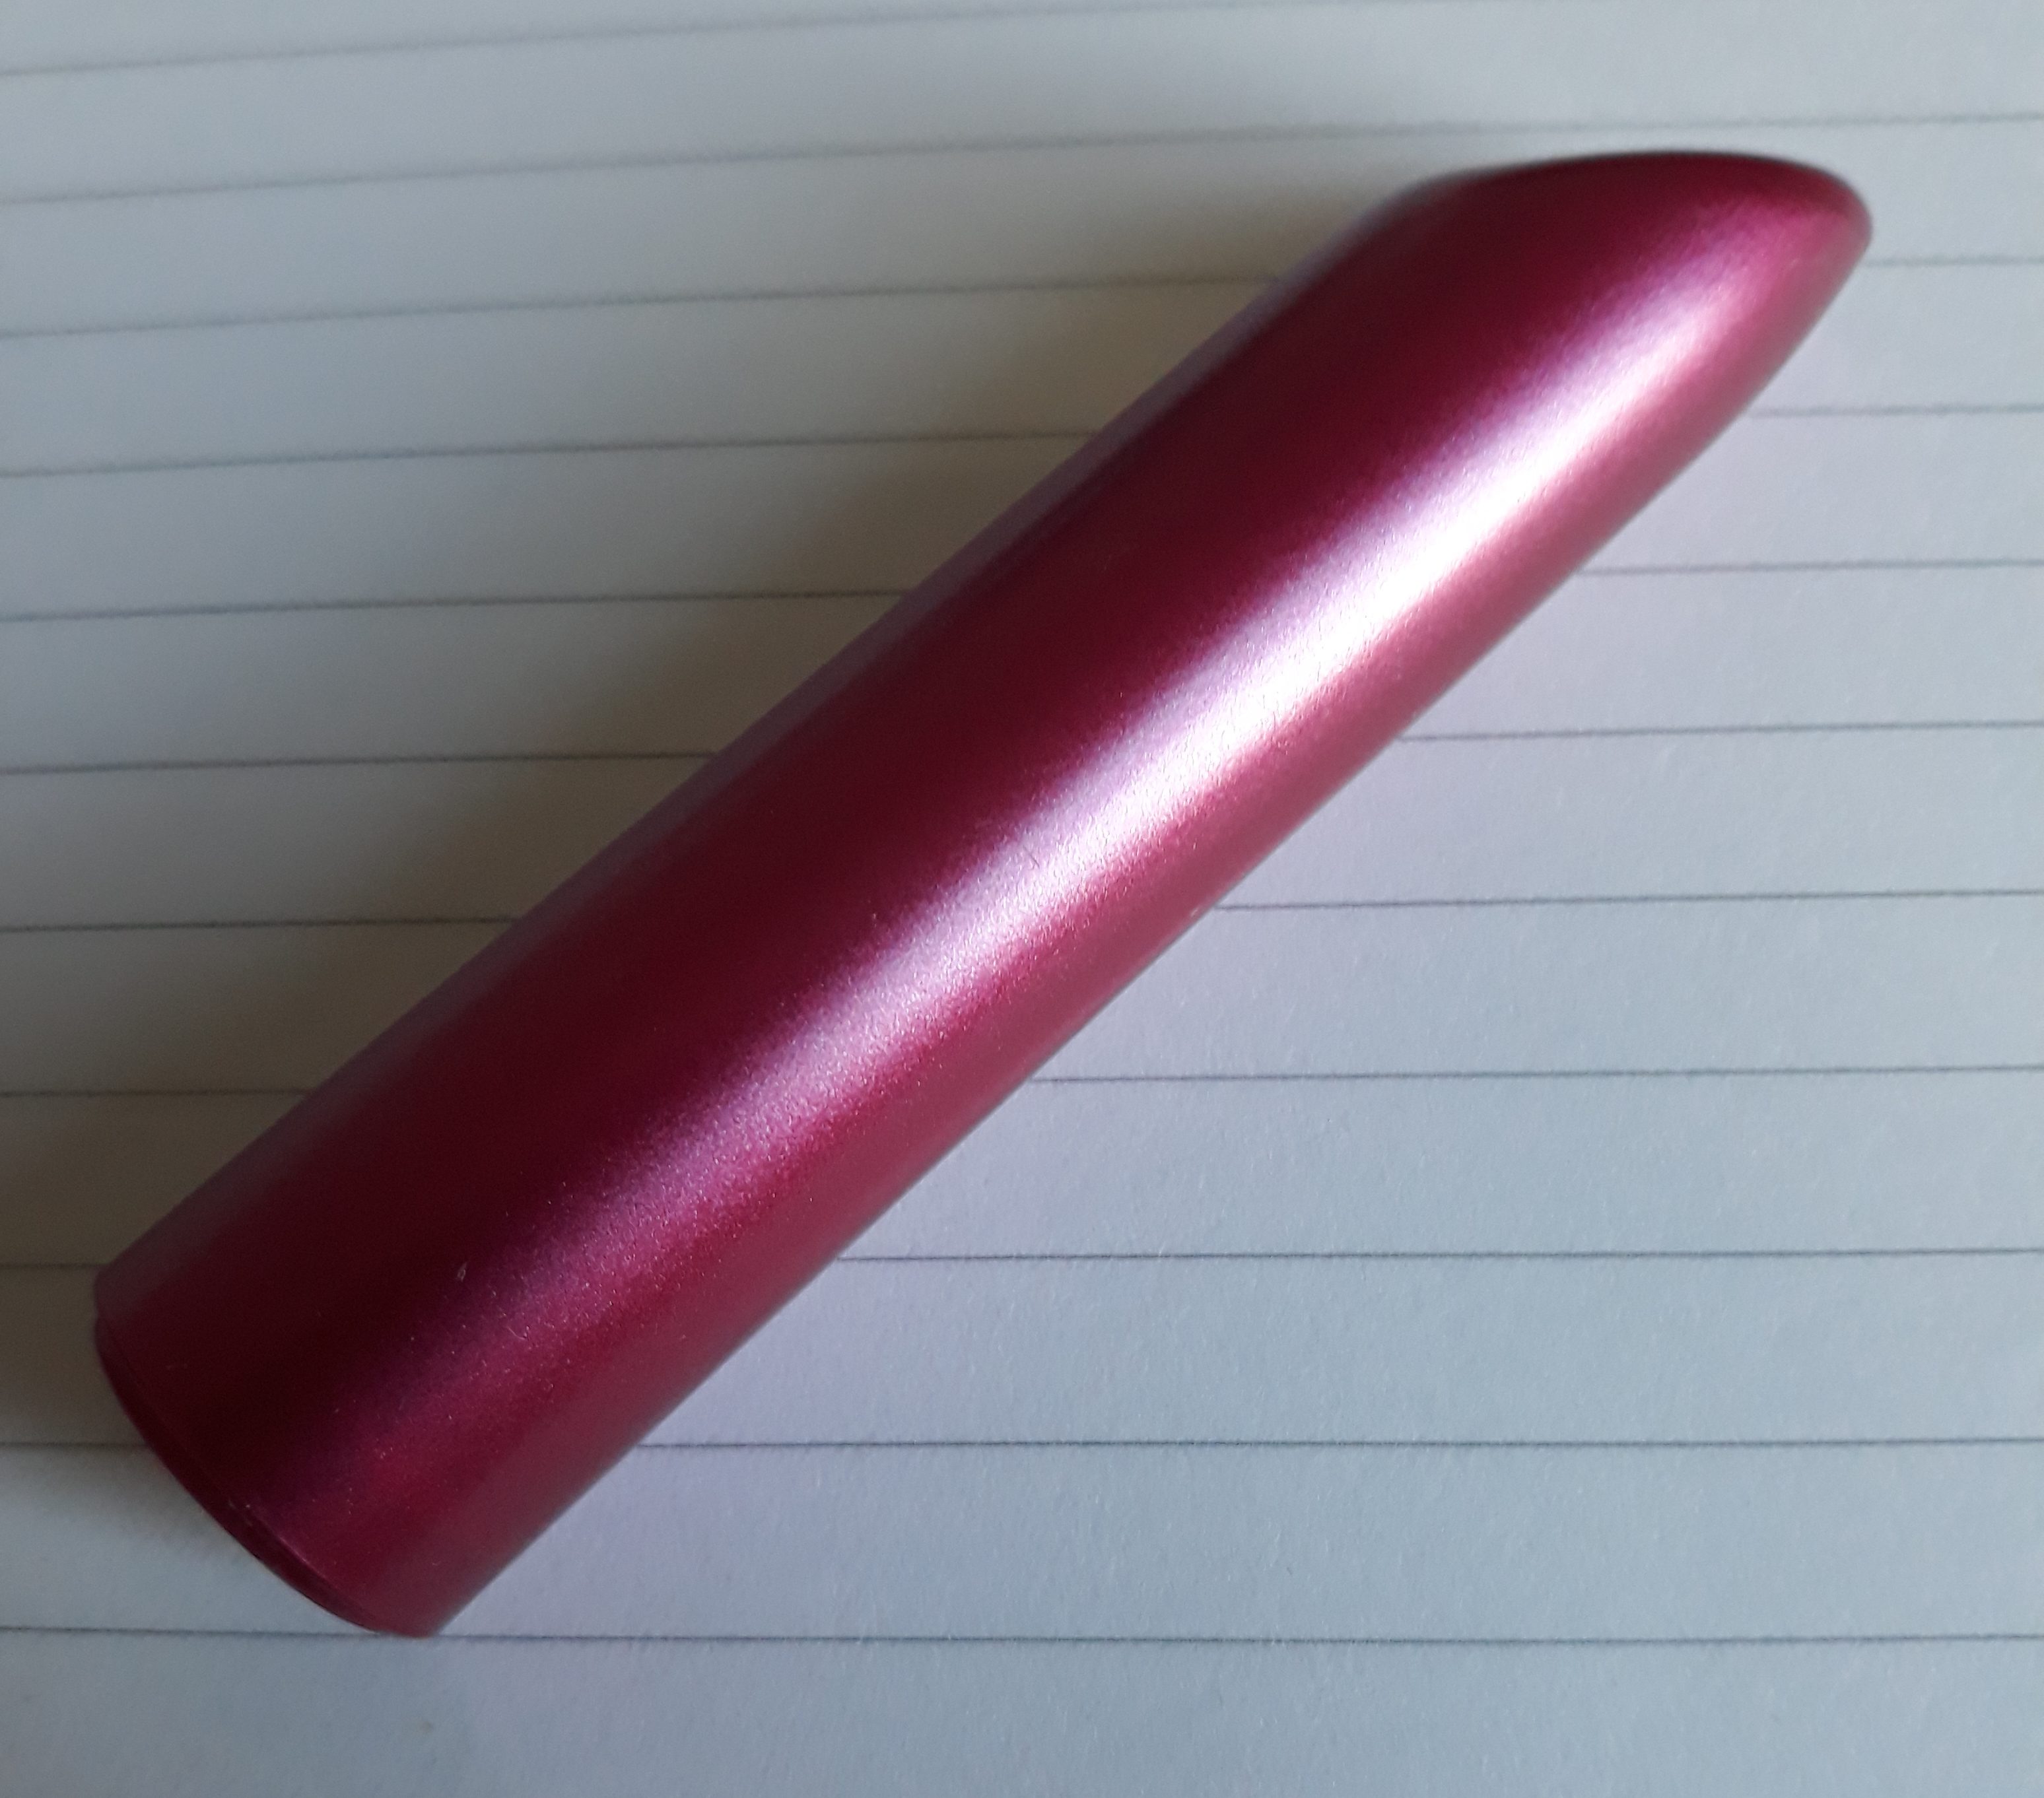 Blush Exposed Nocturnal bullet vibe for clit play, one of the best vibrators under $45